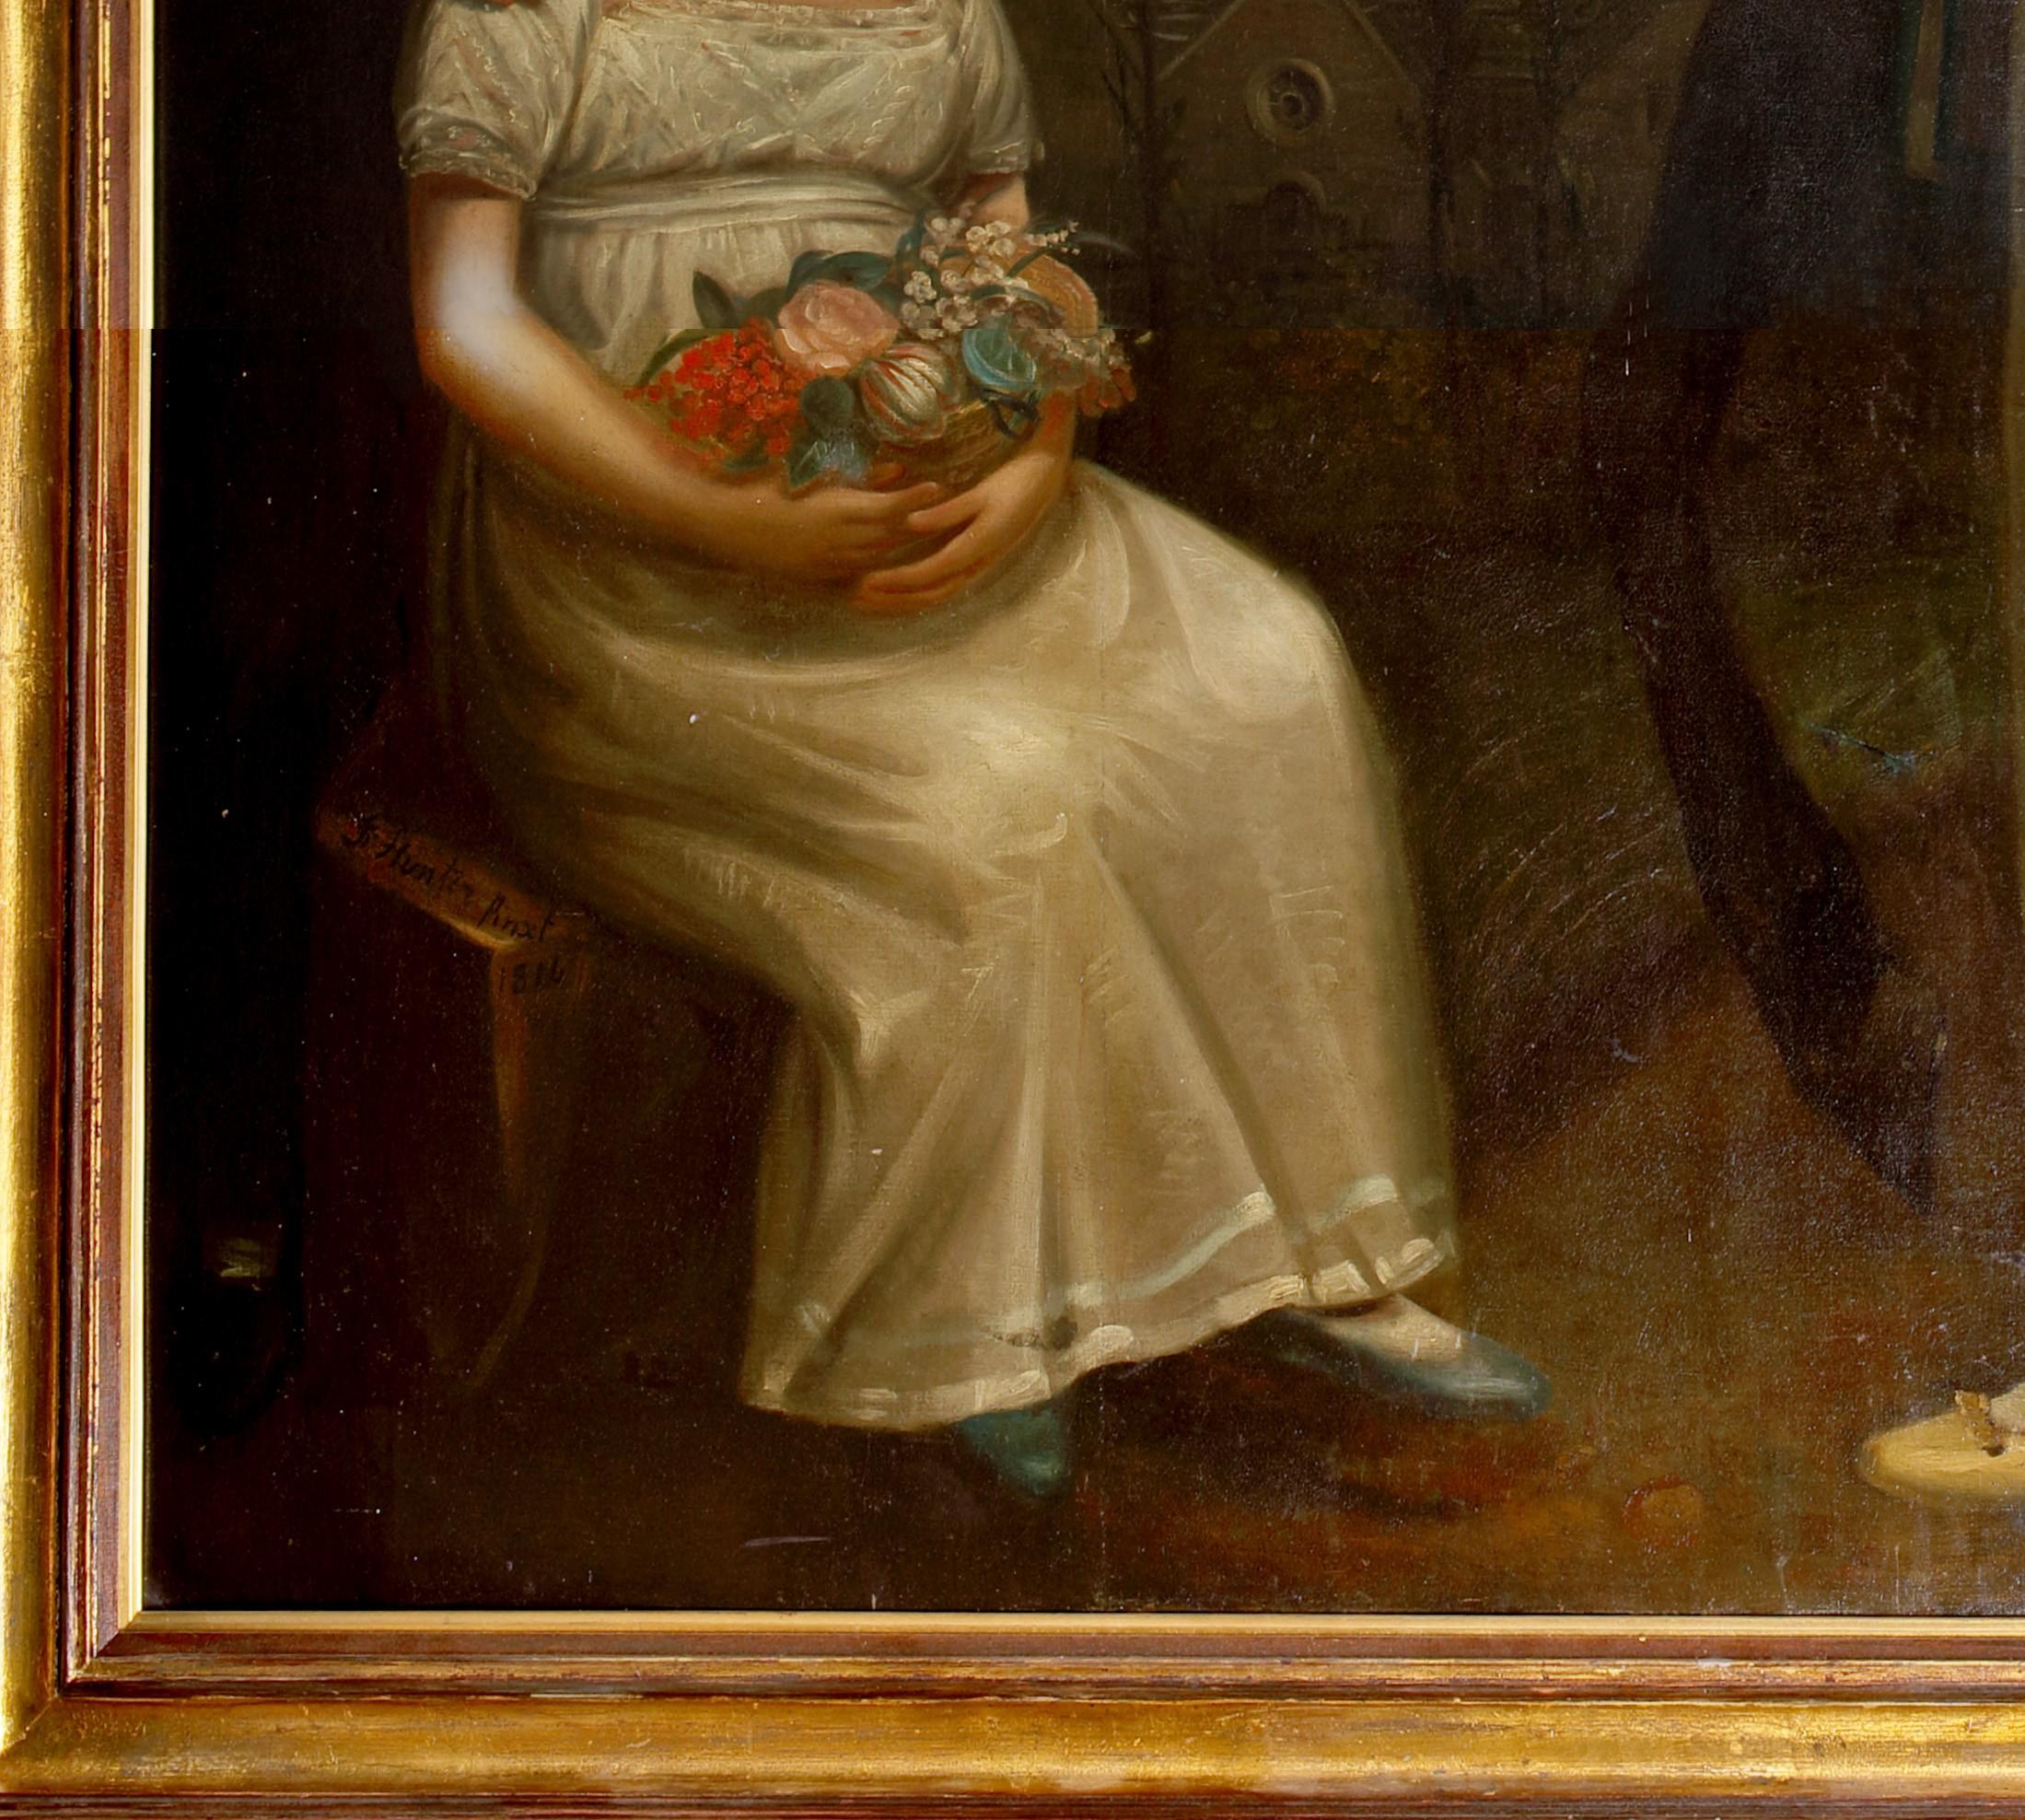 Portrait Of The Fawcett Children Of Bradford, dated 1814  by J. Hunter  - Brown Portrait Painting by Unknown